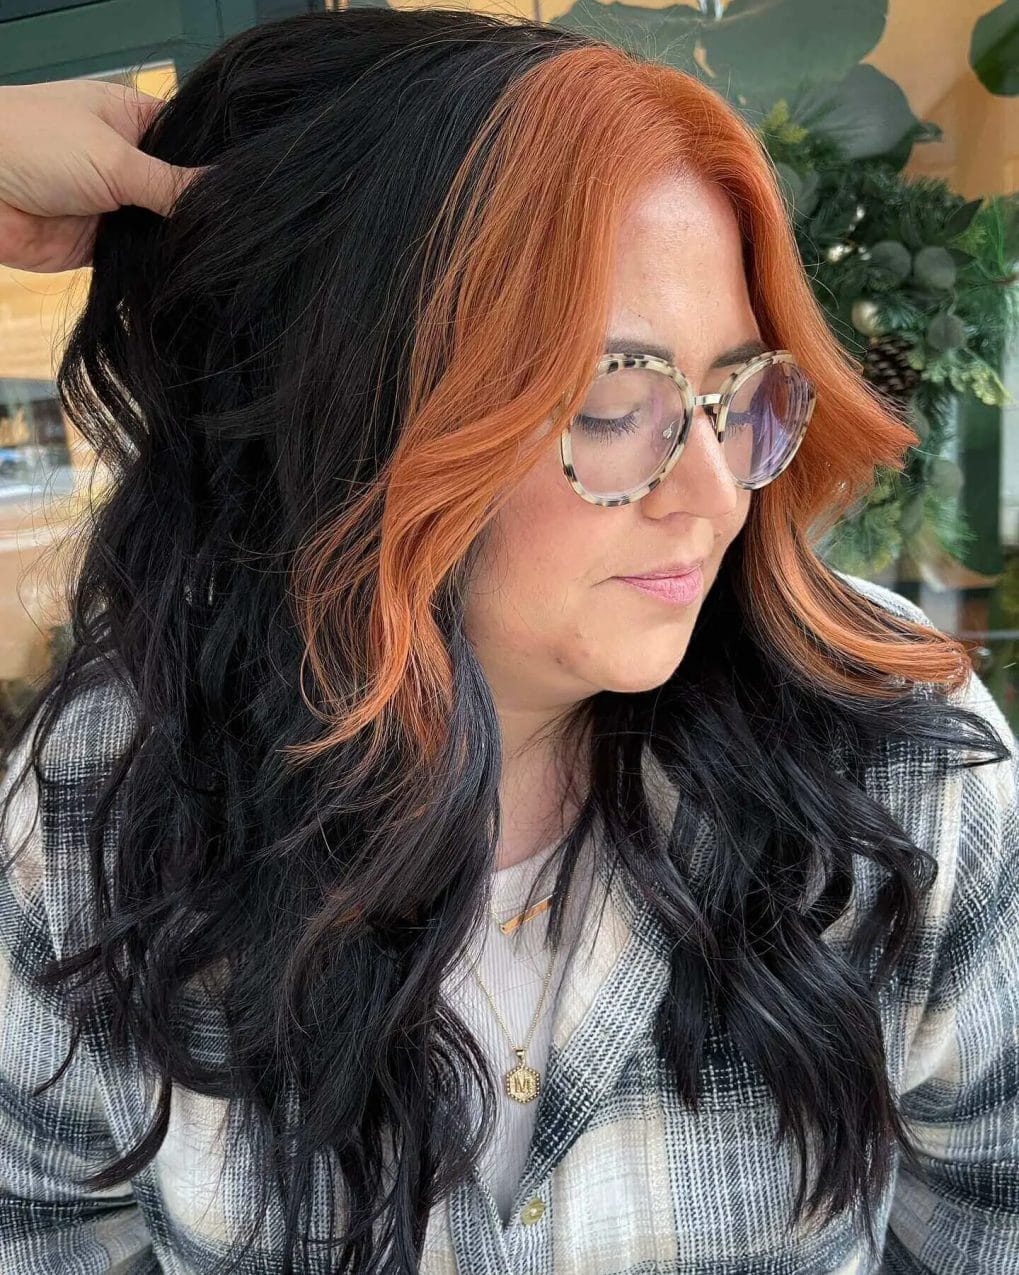 Black roots to fiery copper curls with vibrant frame